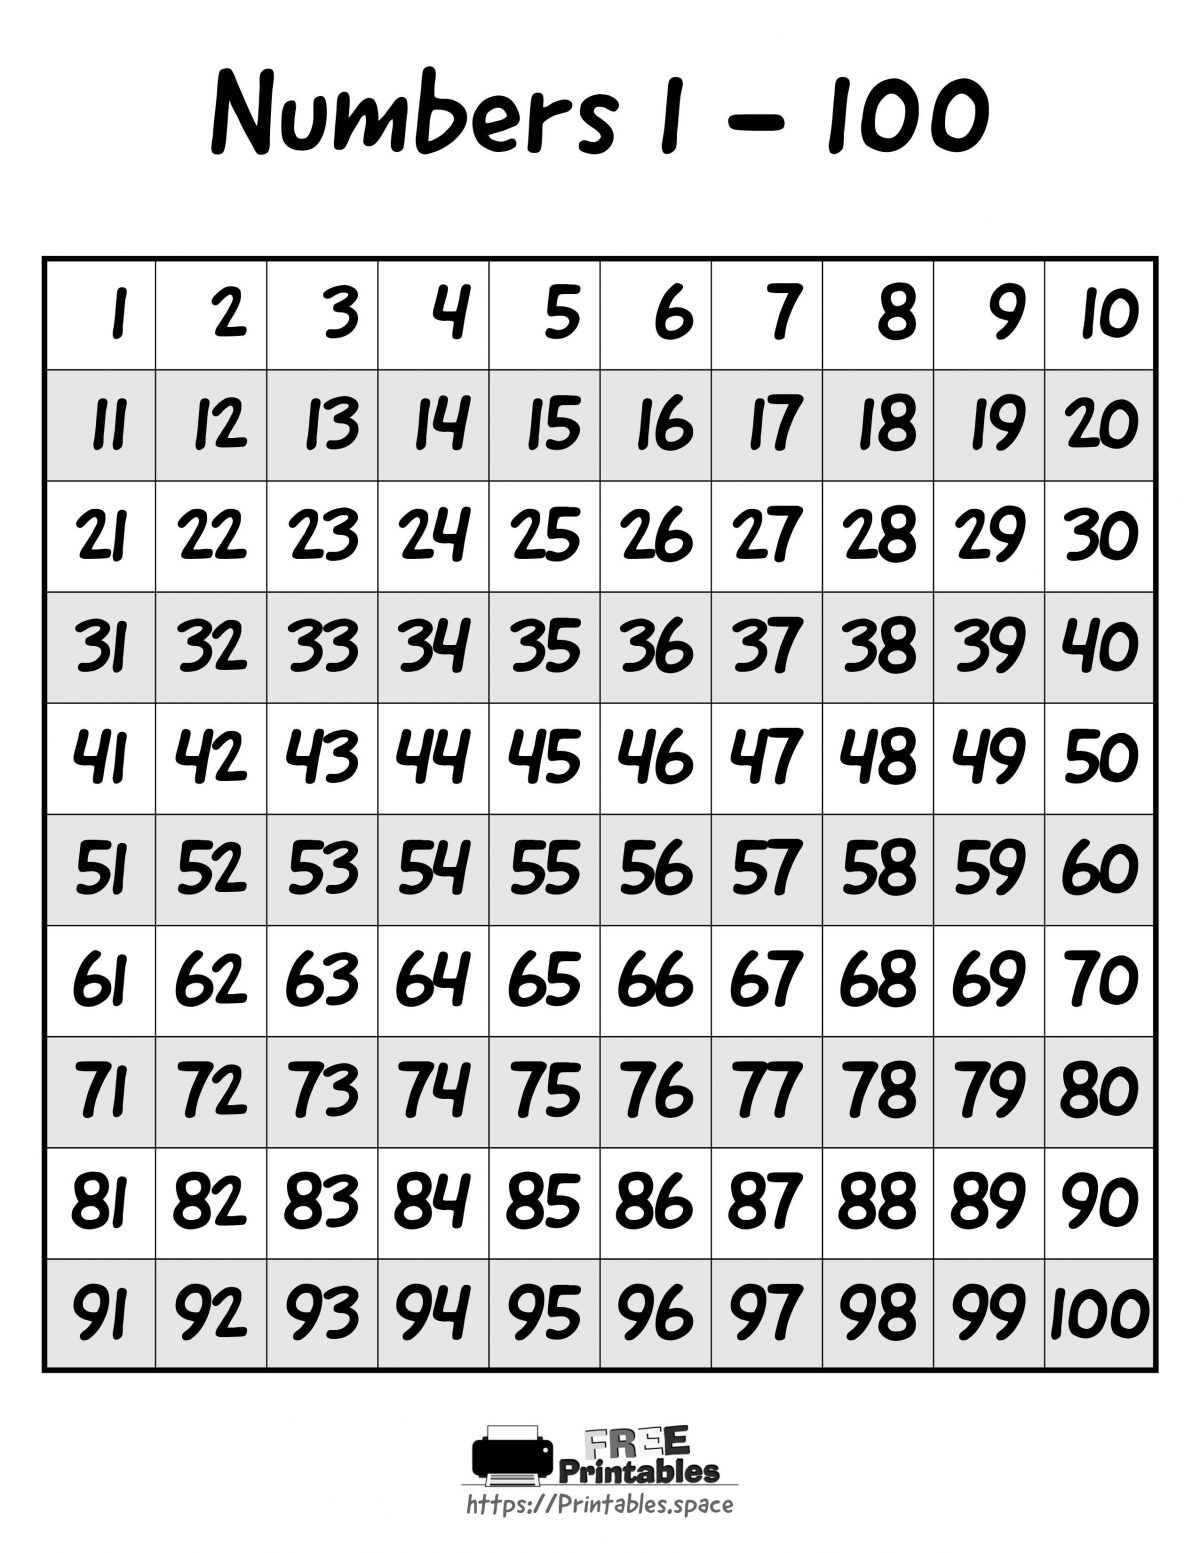 Numbers 1-100 Chart